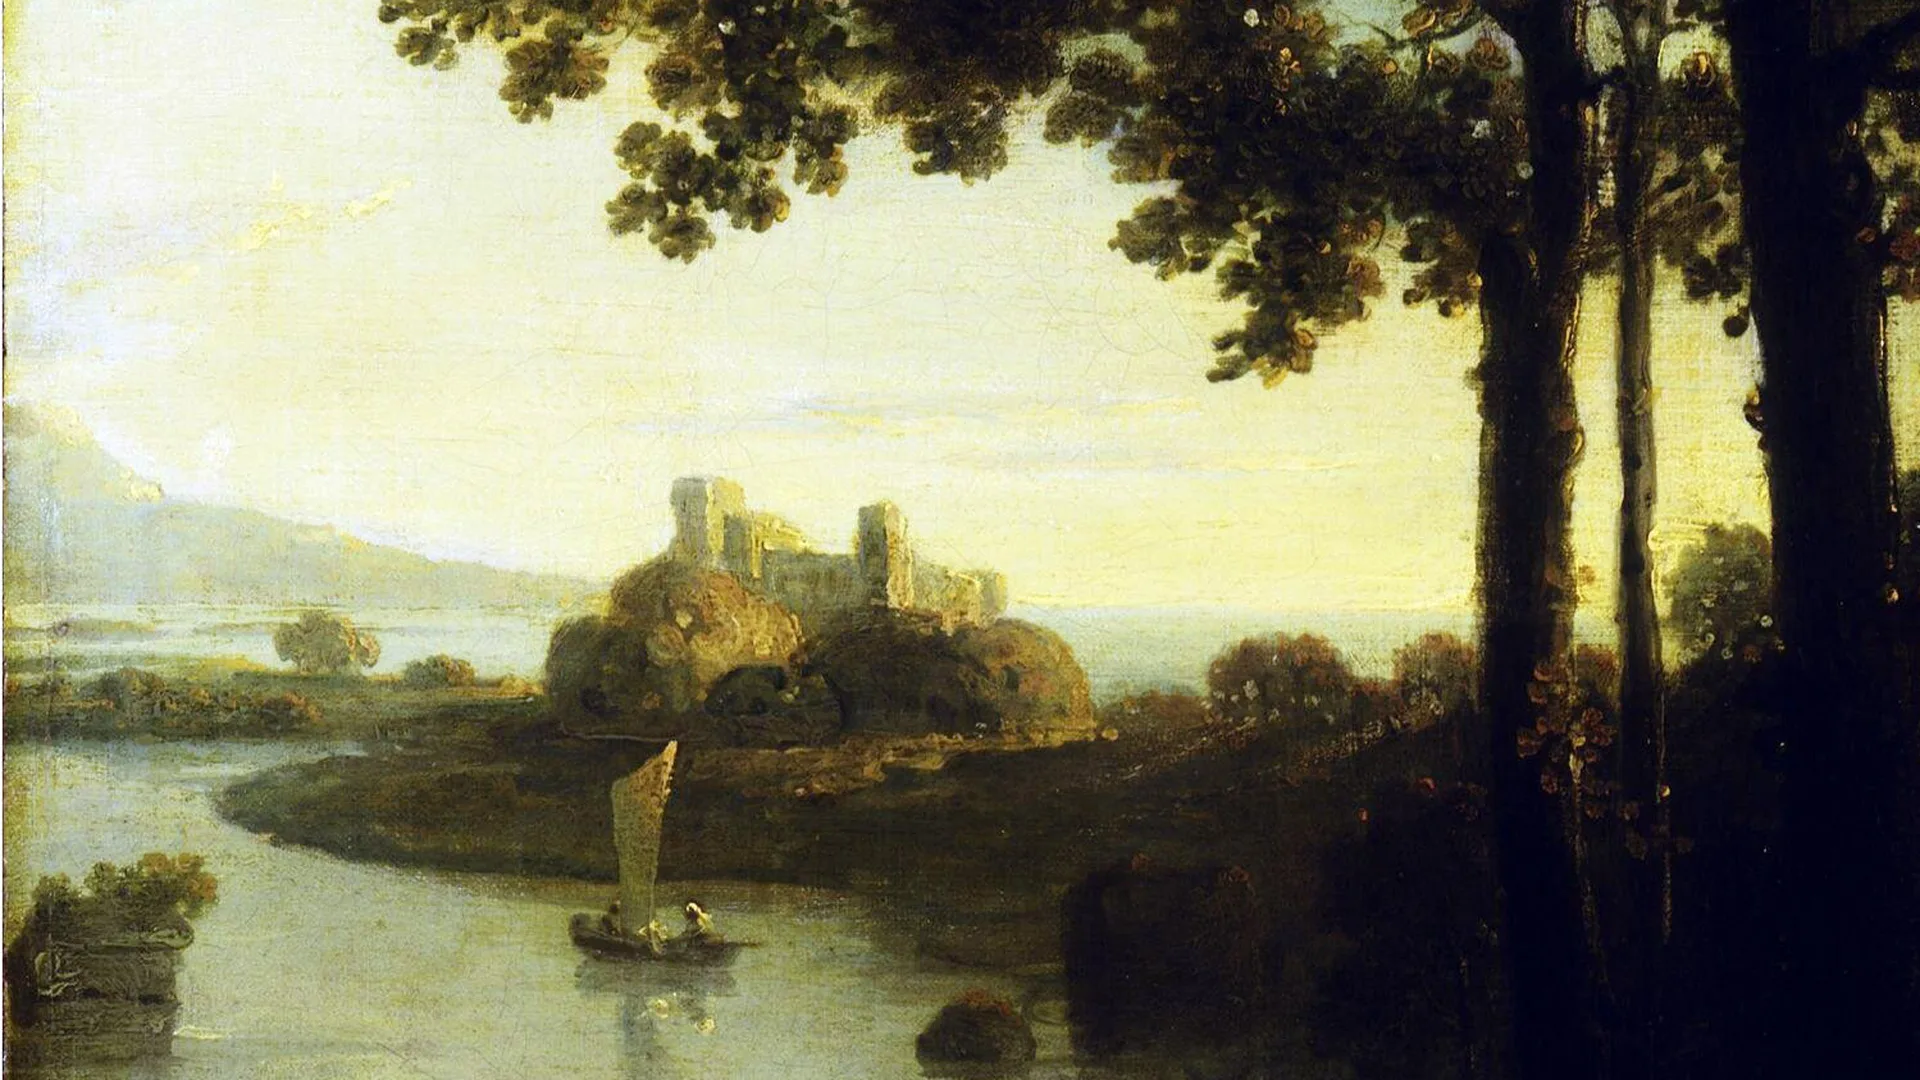 A mid 18th century painting depicting a river and castle scene at sunset with trees in the foreground. The colours are yellows and dark greens.